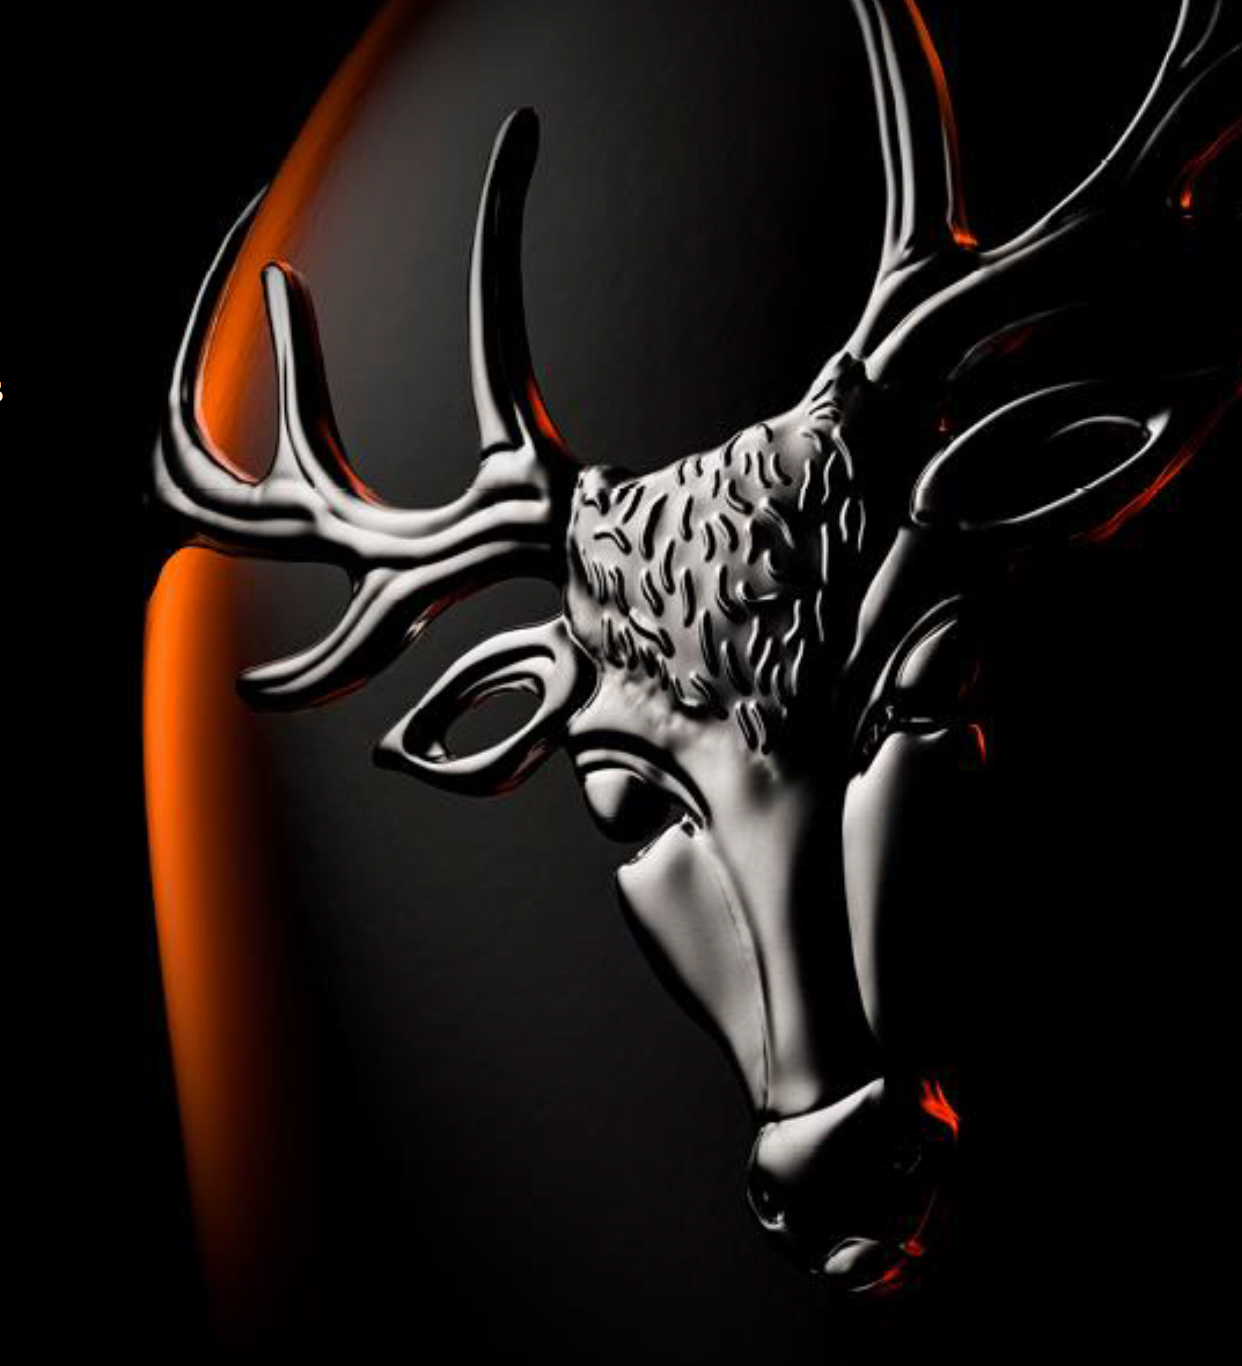 100 Years of The Dalmore Makes a Limited-Time Run at Solaire